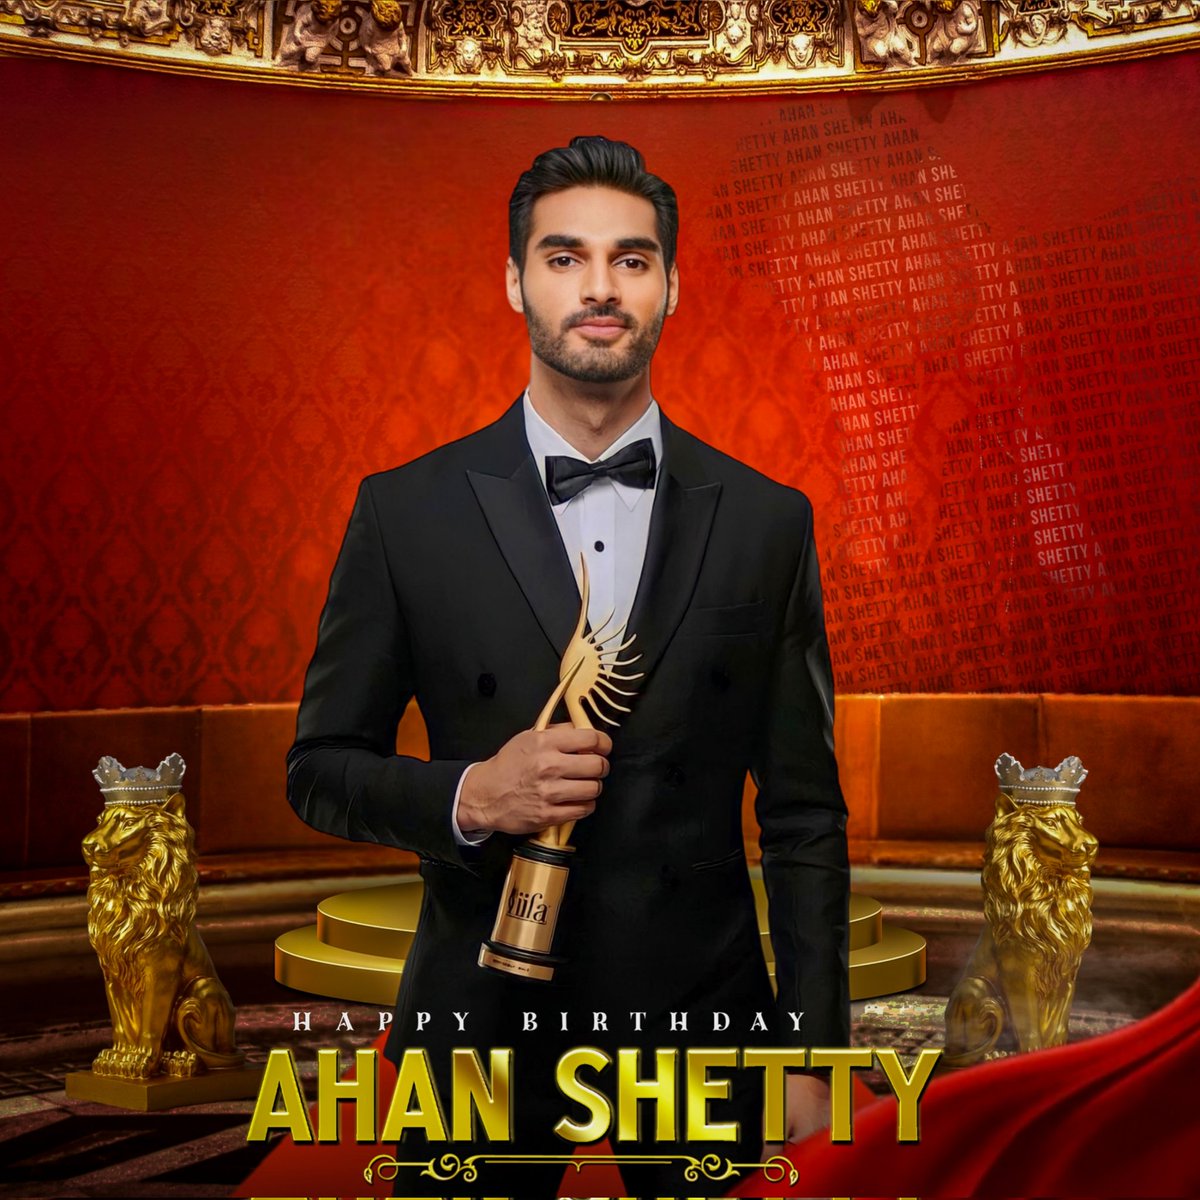 HBD AHAN SHETTY 
He made his debut with a different film called Tadap which is not a regular love story I hope he will grow as an actor and become a star in future #SunilShetty fans ❤️‍🔥💙